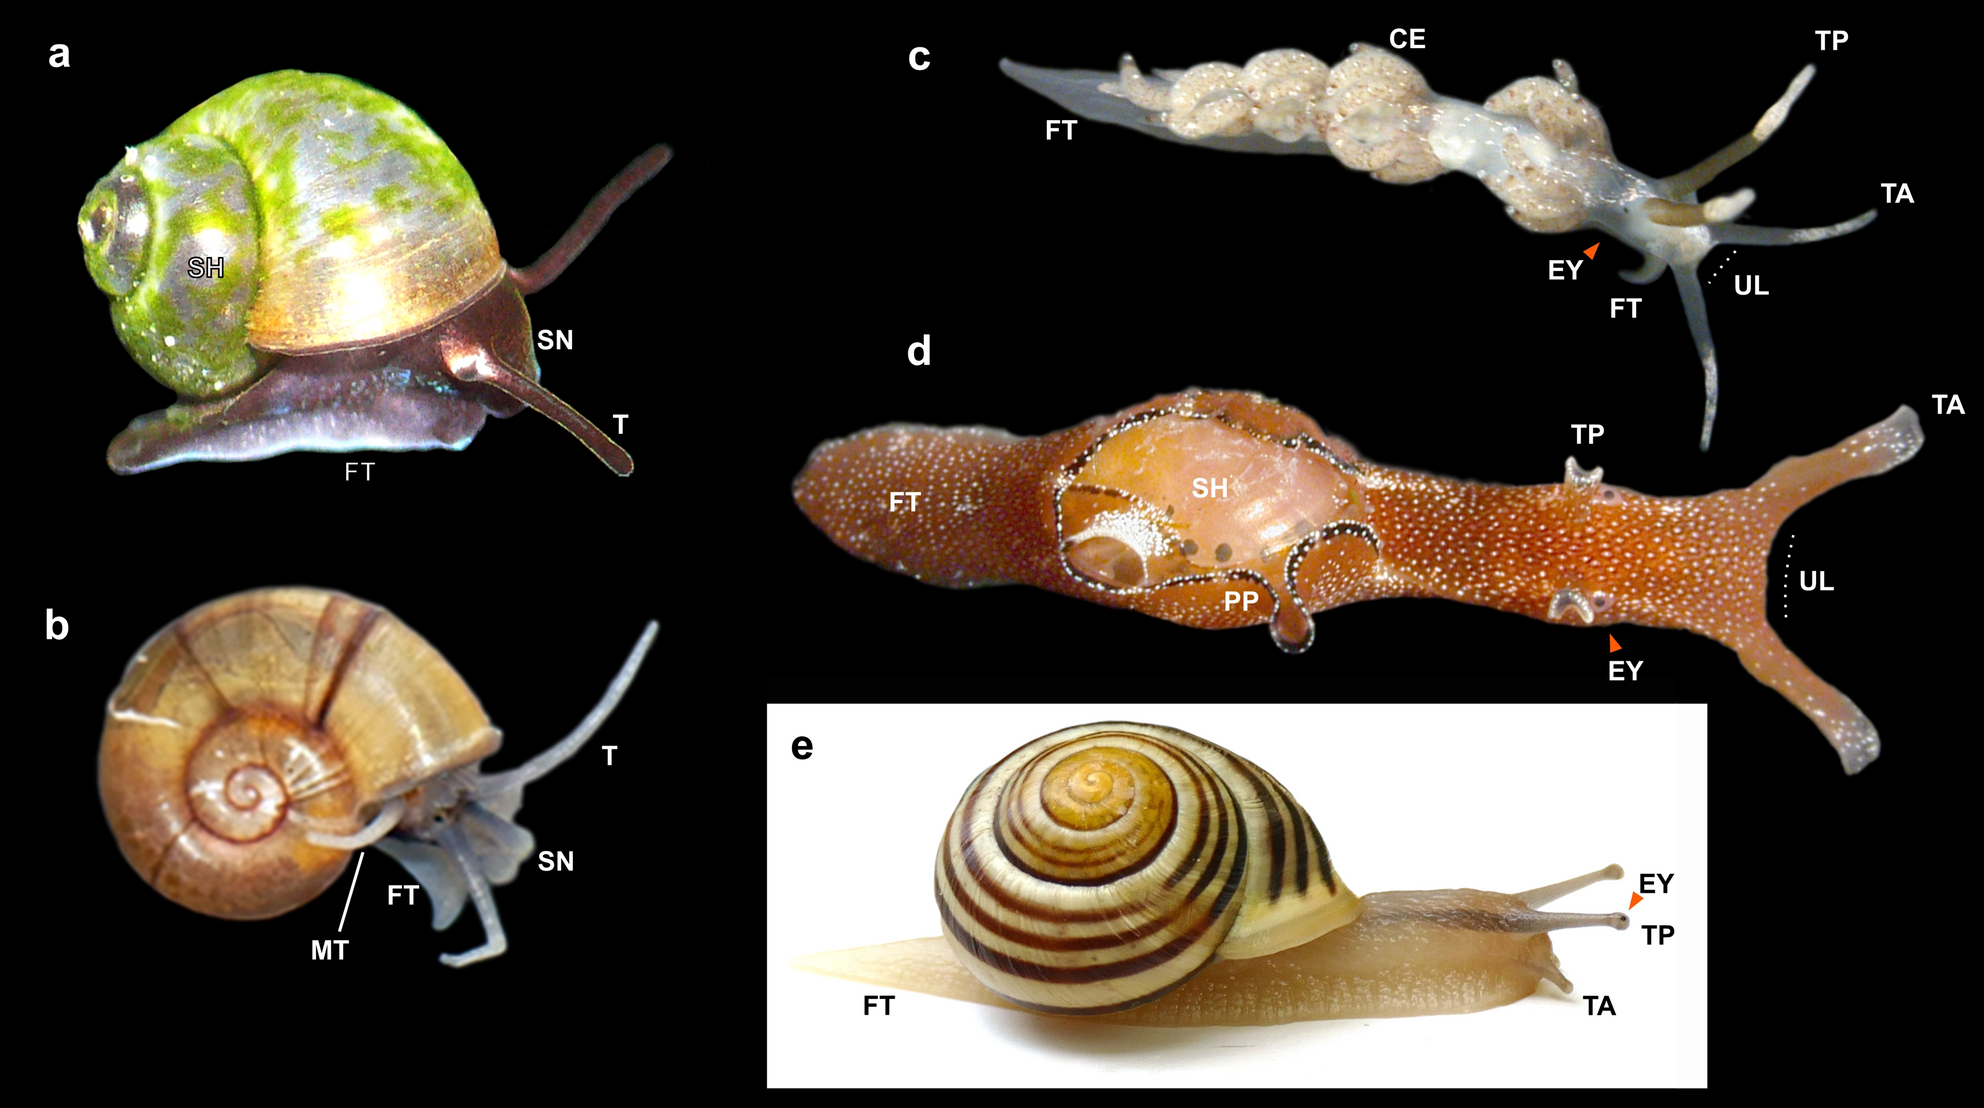 What is the function of the bottom two tentacles of a snail?